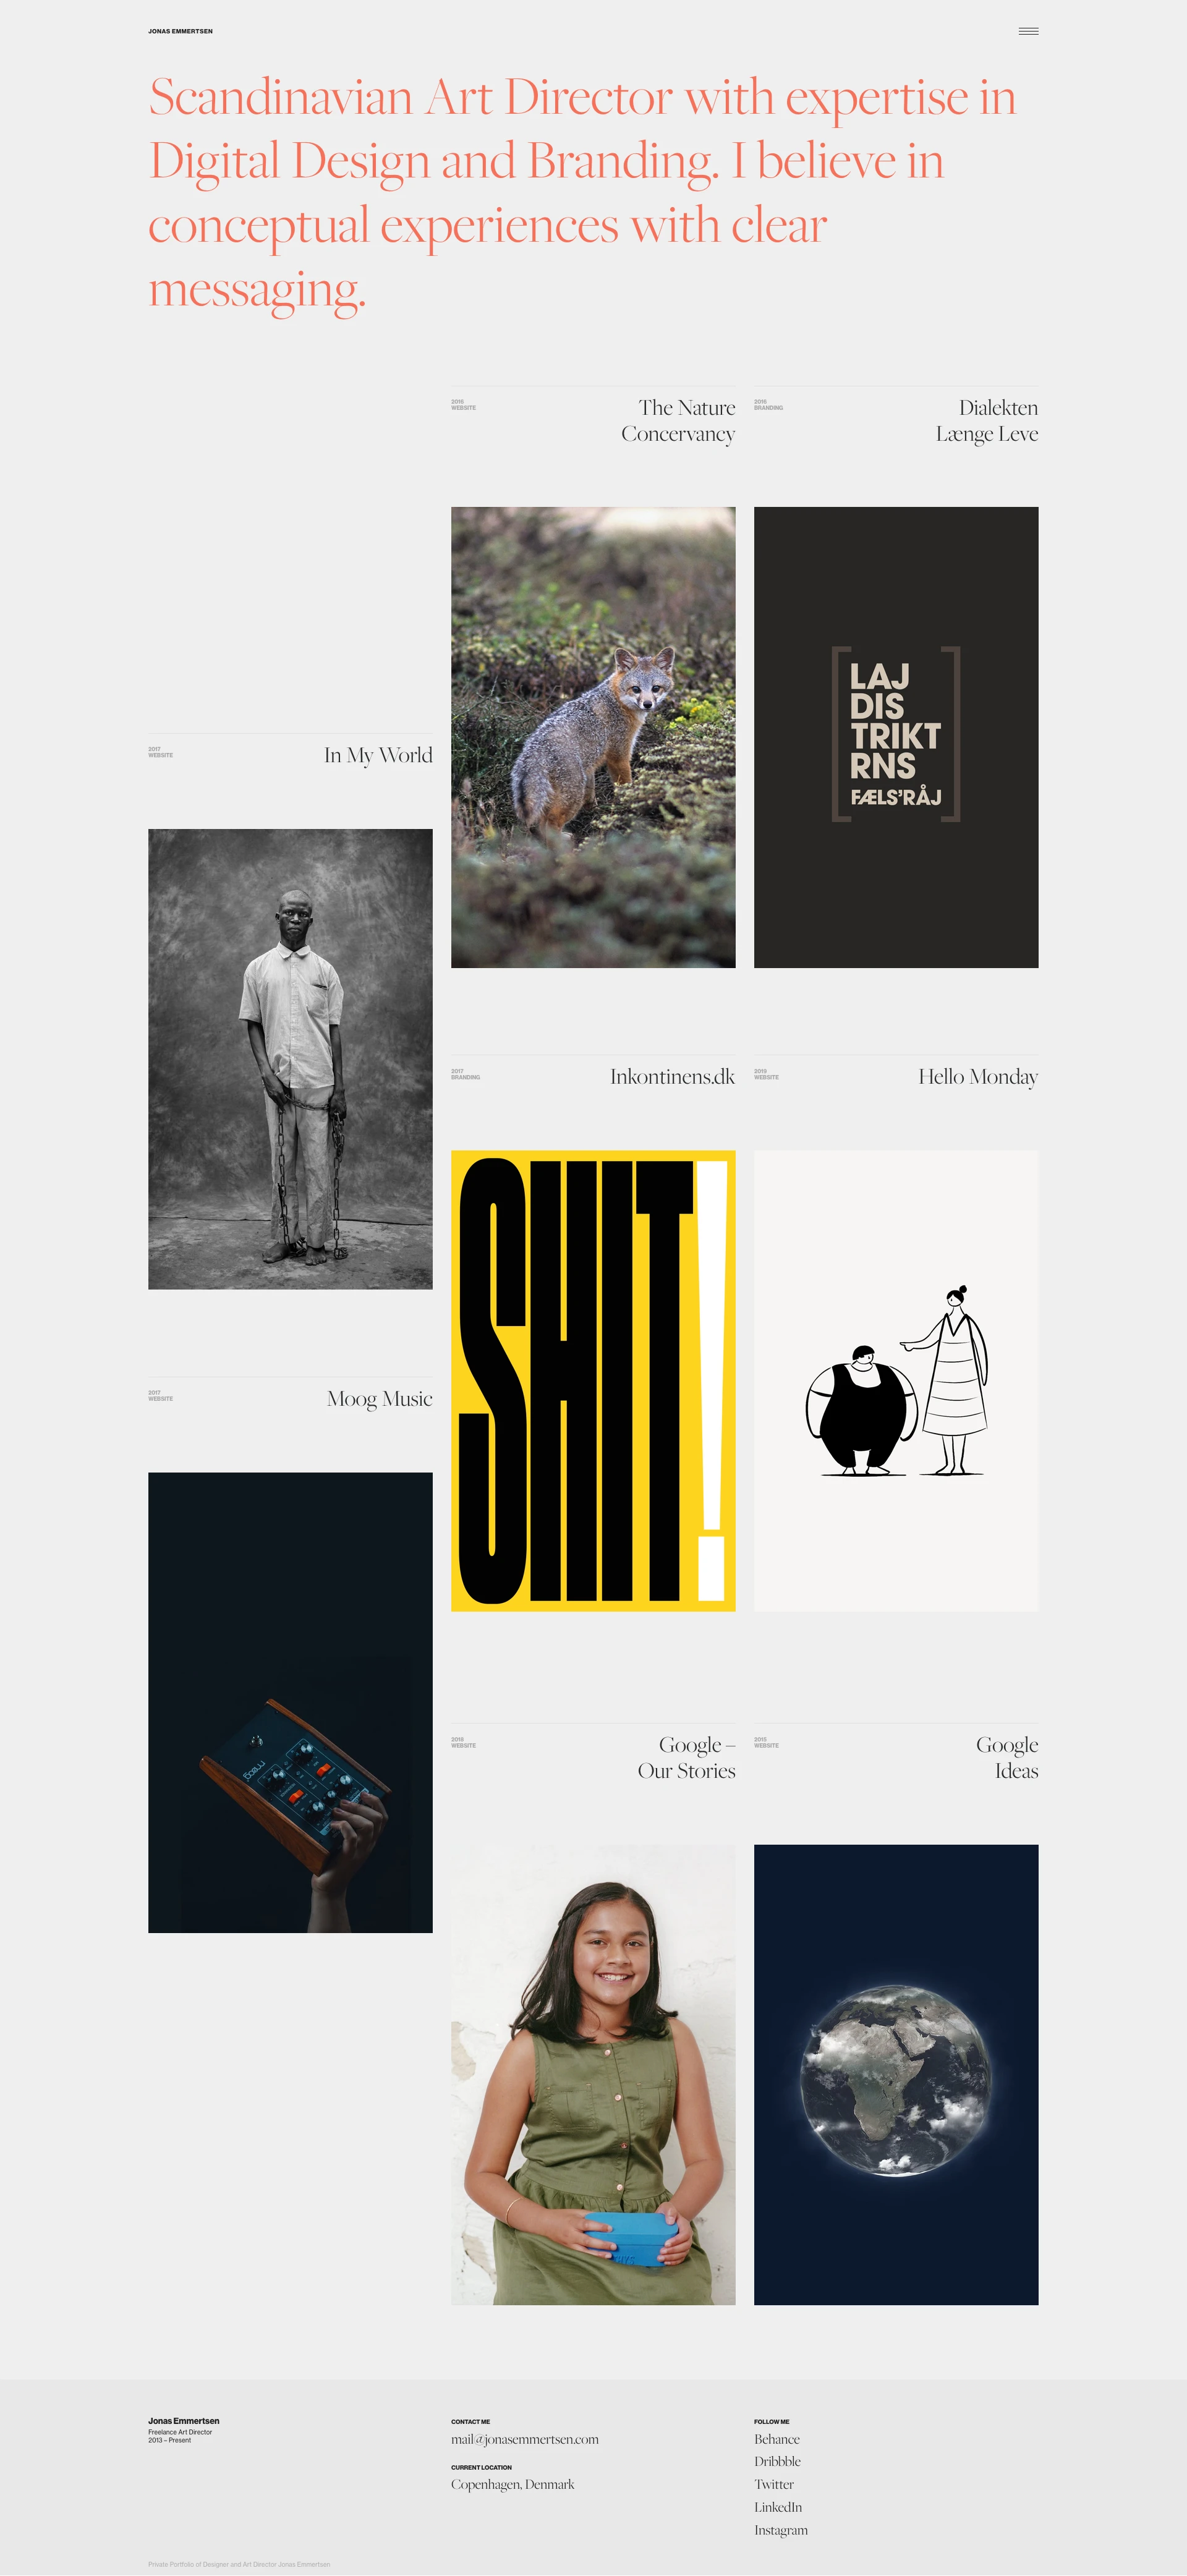 Jonas Emmertsen Landing Page Example: Scandinavian Art Director with expertise in Digital Design and Branding. I believe in conceptual experiences with clear messaging.